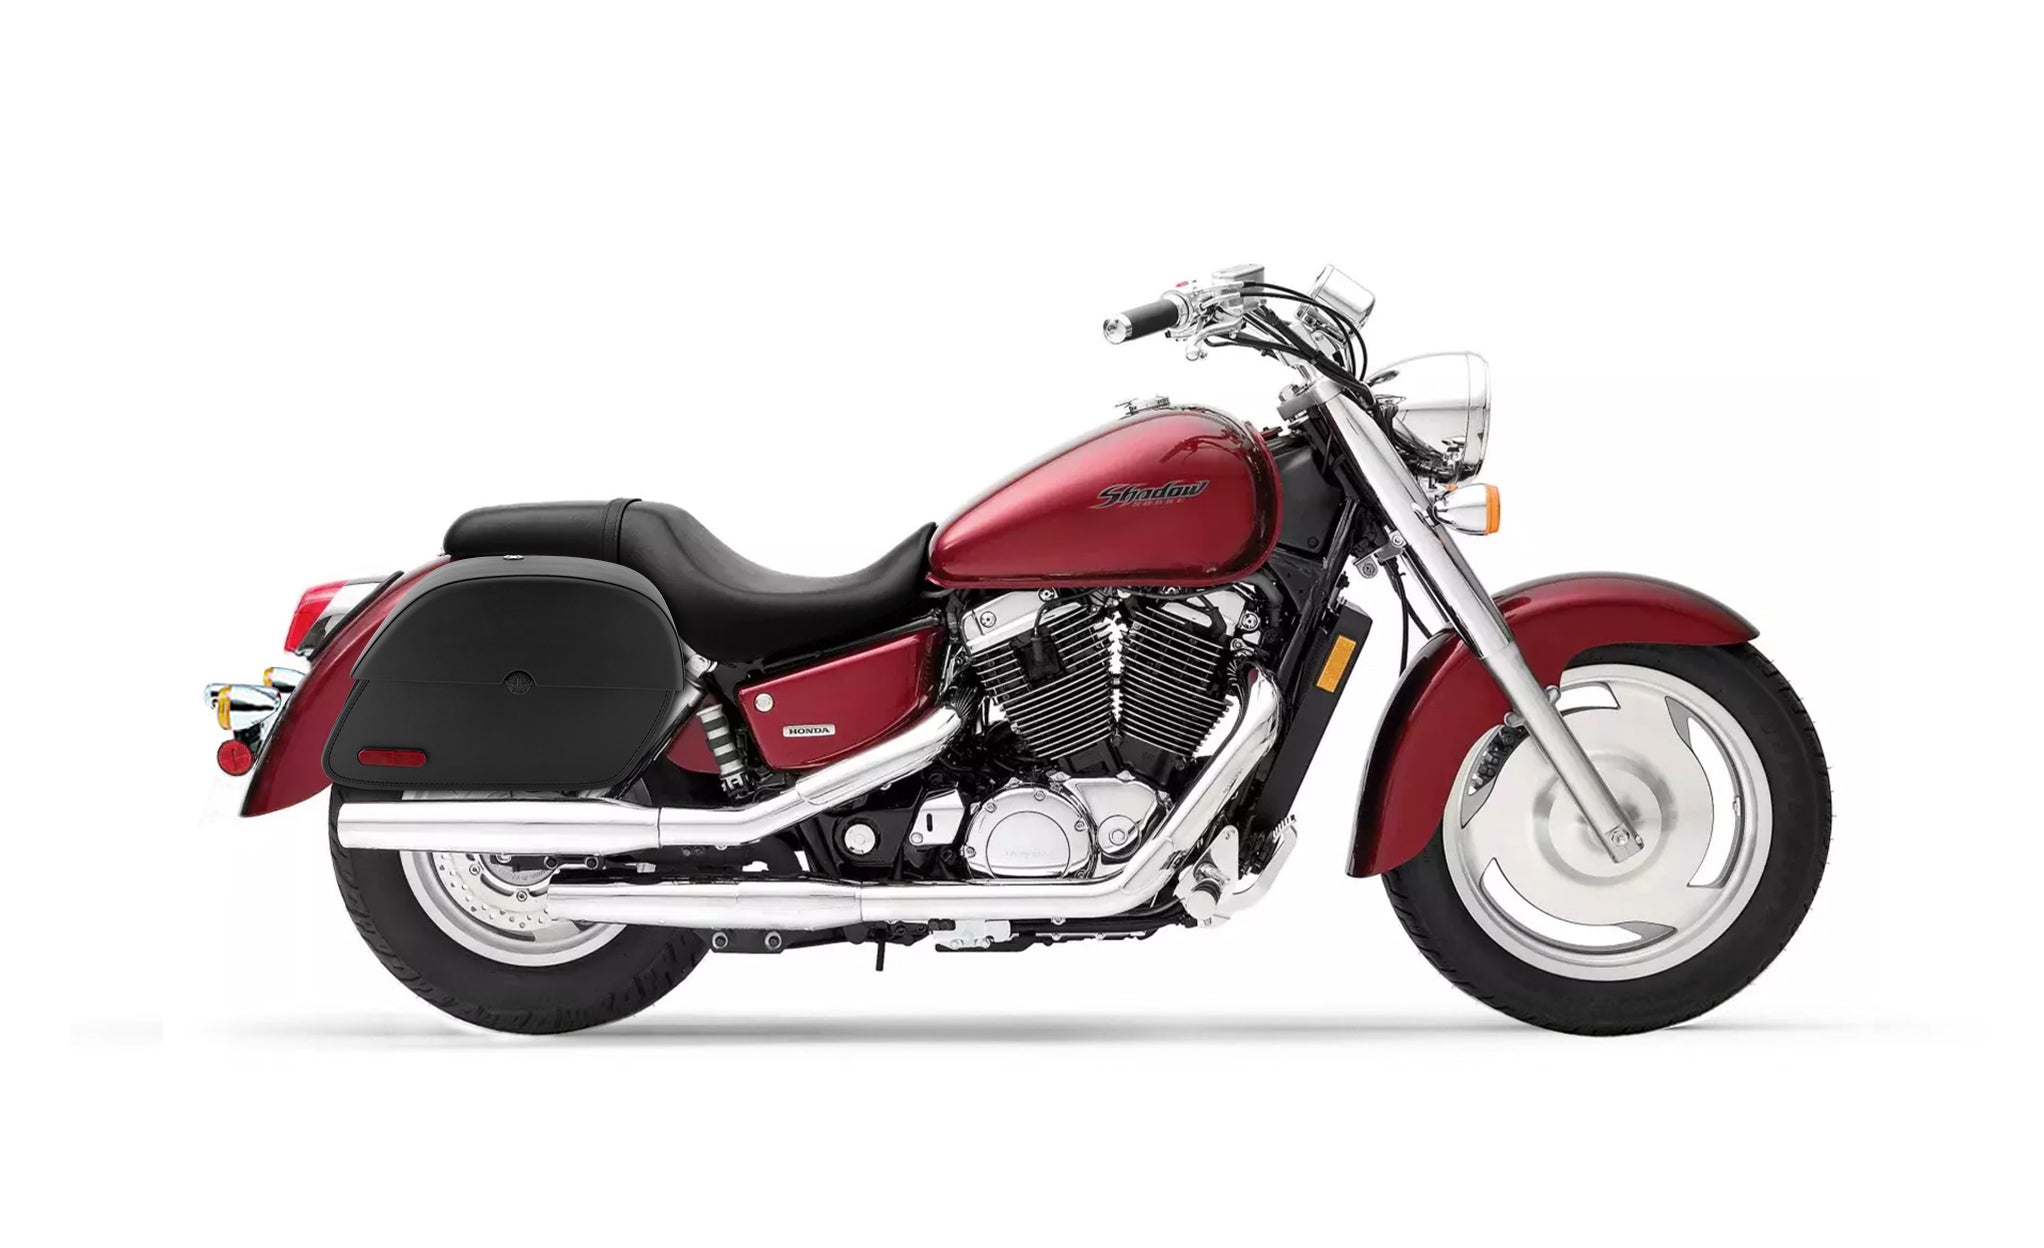 Viking Panzer Medium Honda Shadow 1100 Sabre Leather Motorcycle Saddlebags Engineering Excellence with Bag on Bike @expand